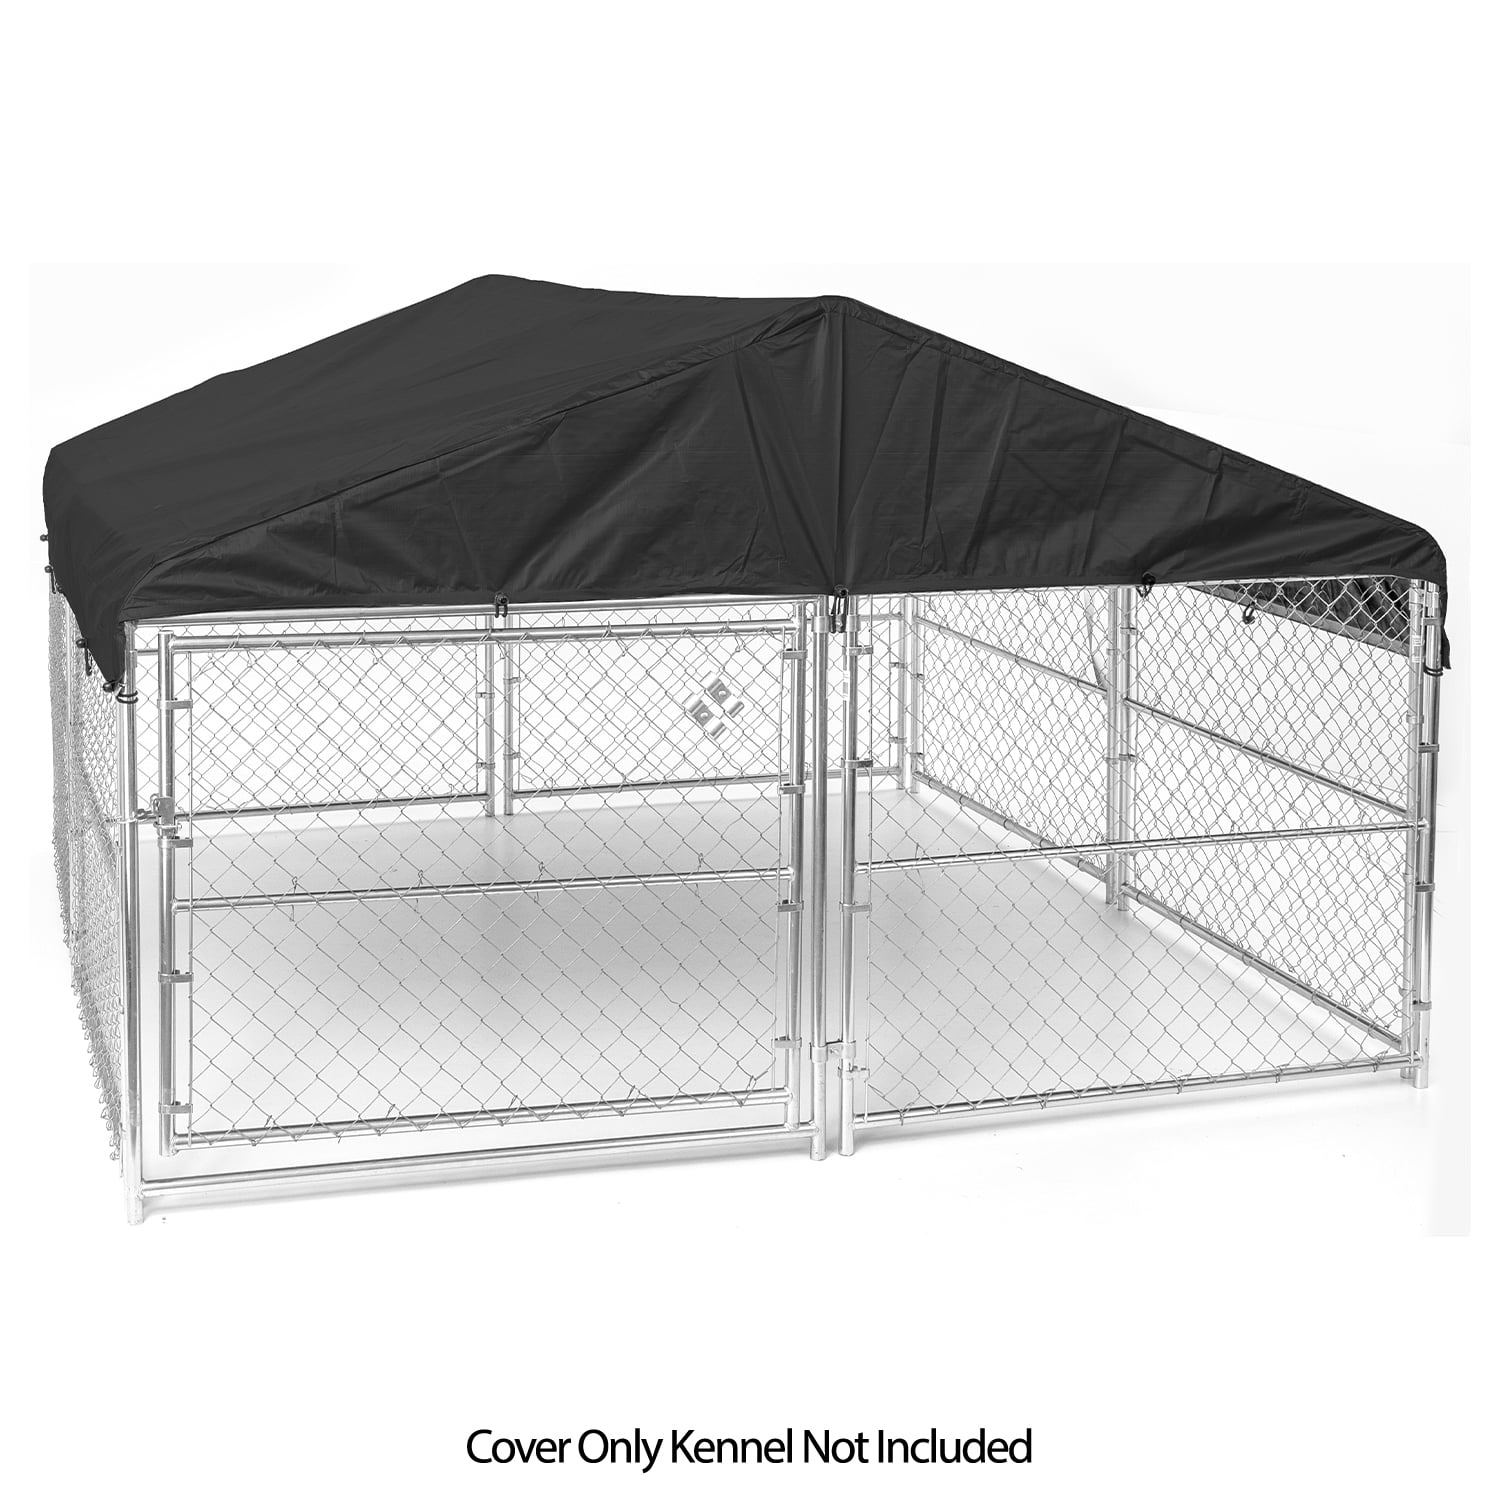 Kennel Cover 10 X 12 Black 